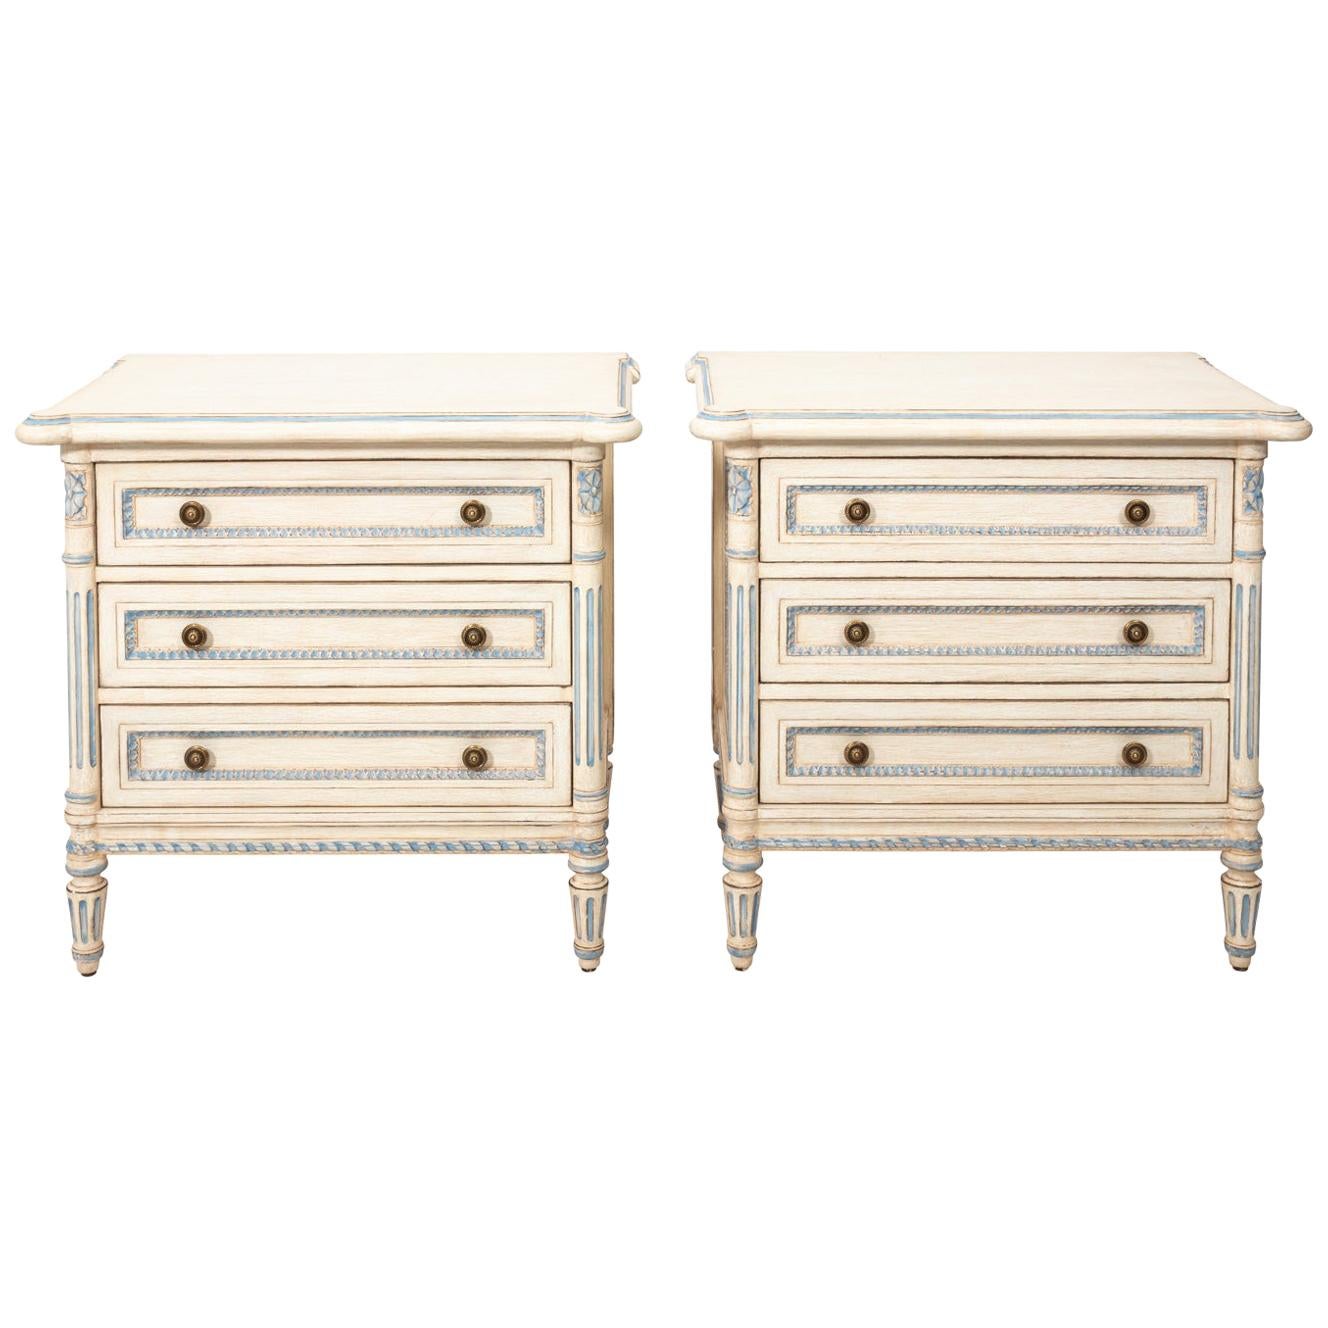 Pair of Cream Painted Commodes with Blue Trim